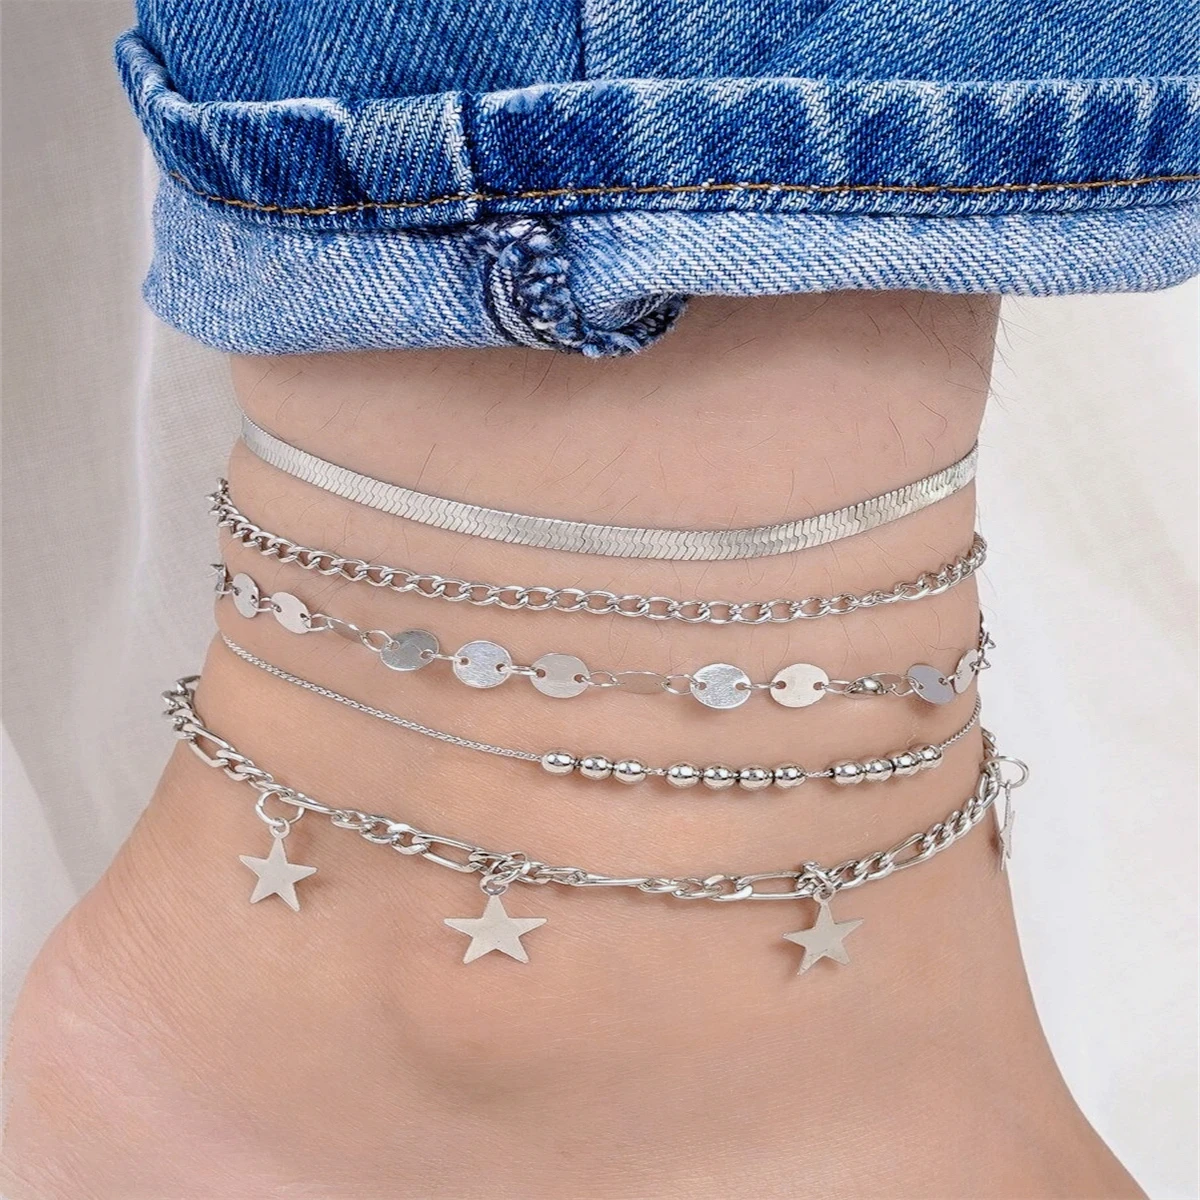 

5pcs Female Summer Anklets For Women Star Bead Anklet Set Bohemia Foot Beach Women Fashion Barefoot Chain Jewelry Gift